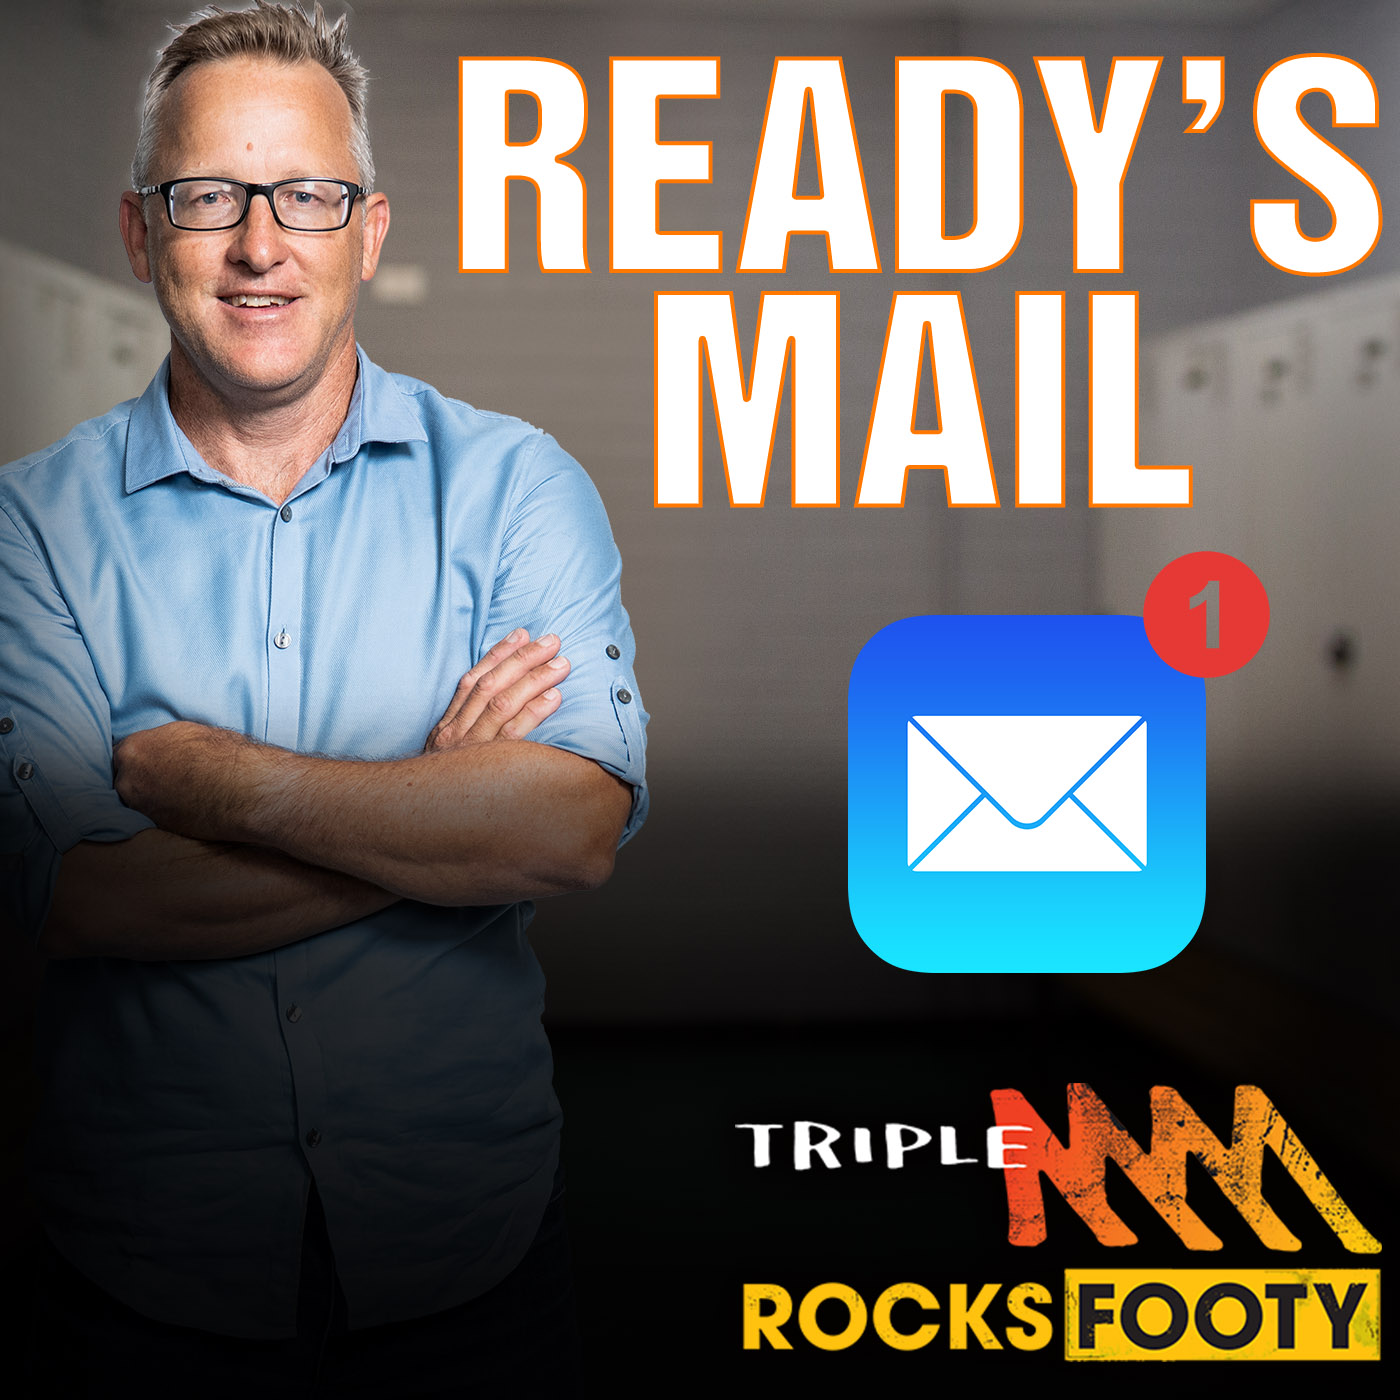 Ready's Mail | NRL Club Up Offer For Dale Finucane, Greg Inglis Wants To Coach & A Huge Court Date Set With Massive Ramifications